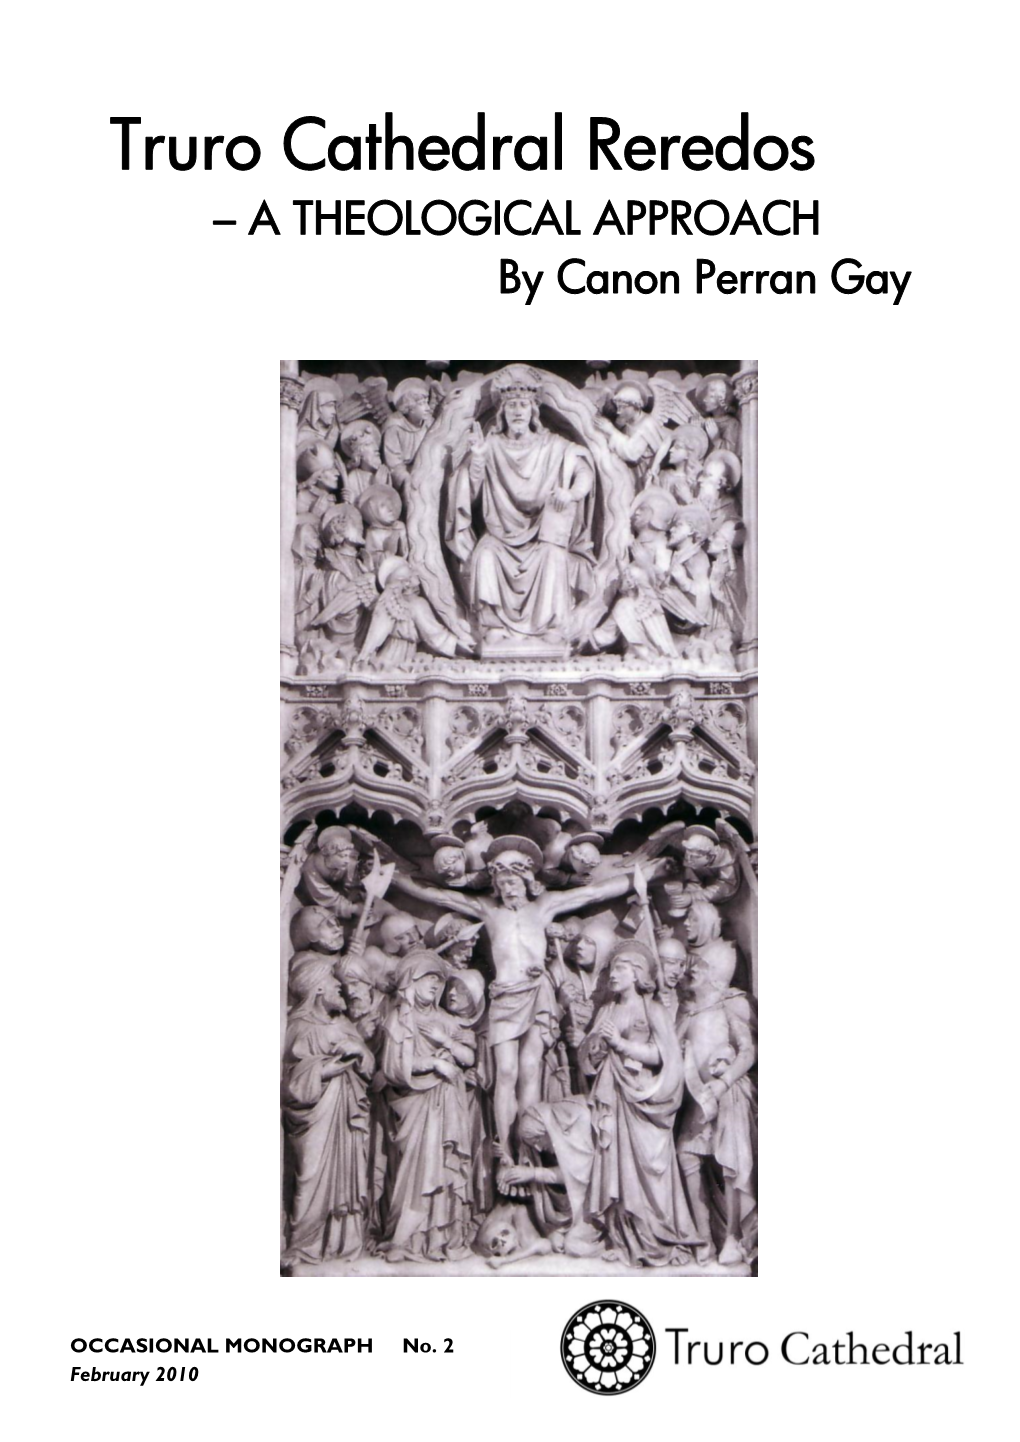 Truro Cathedral Reredos – a THEOLOGICAL APPROACH by Canon Perran Gay